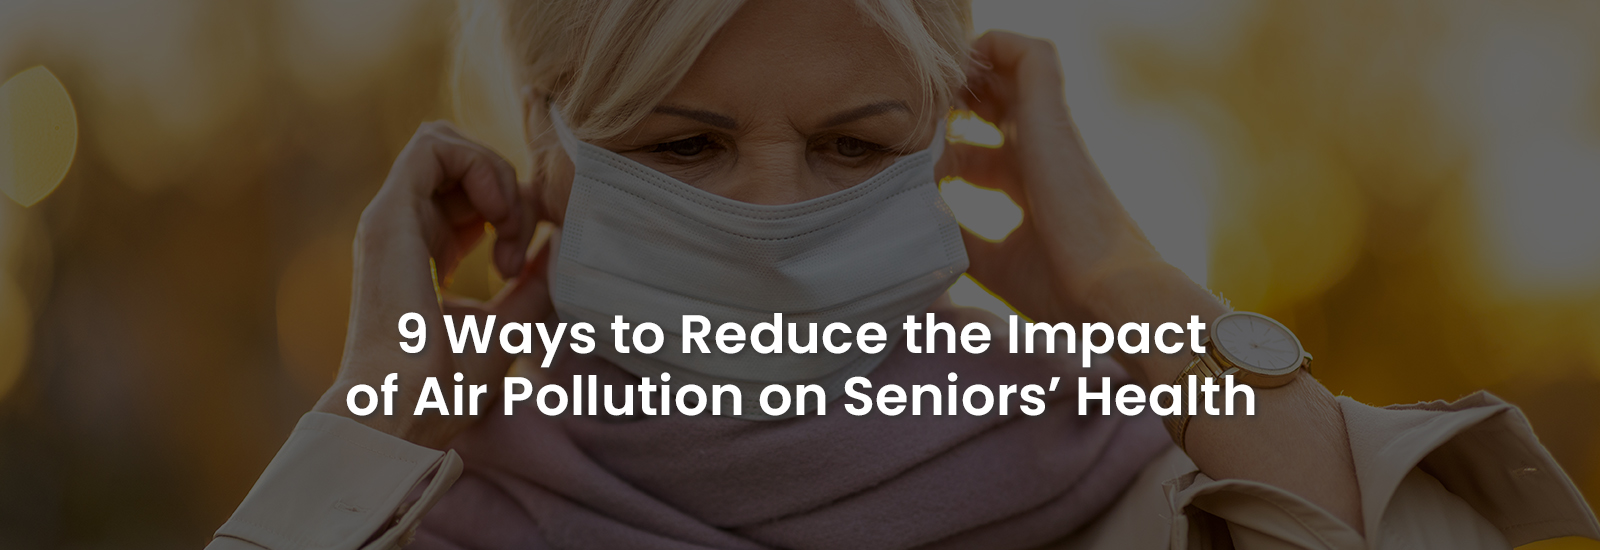 9 Ways to Reduce the Impact of Air Pollution on Seniors Health | Banner Image